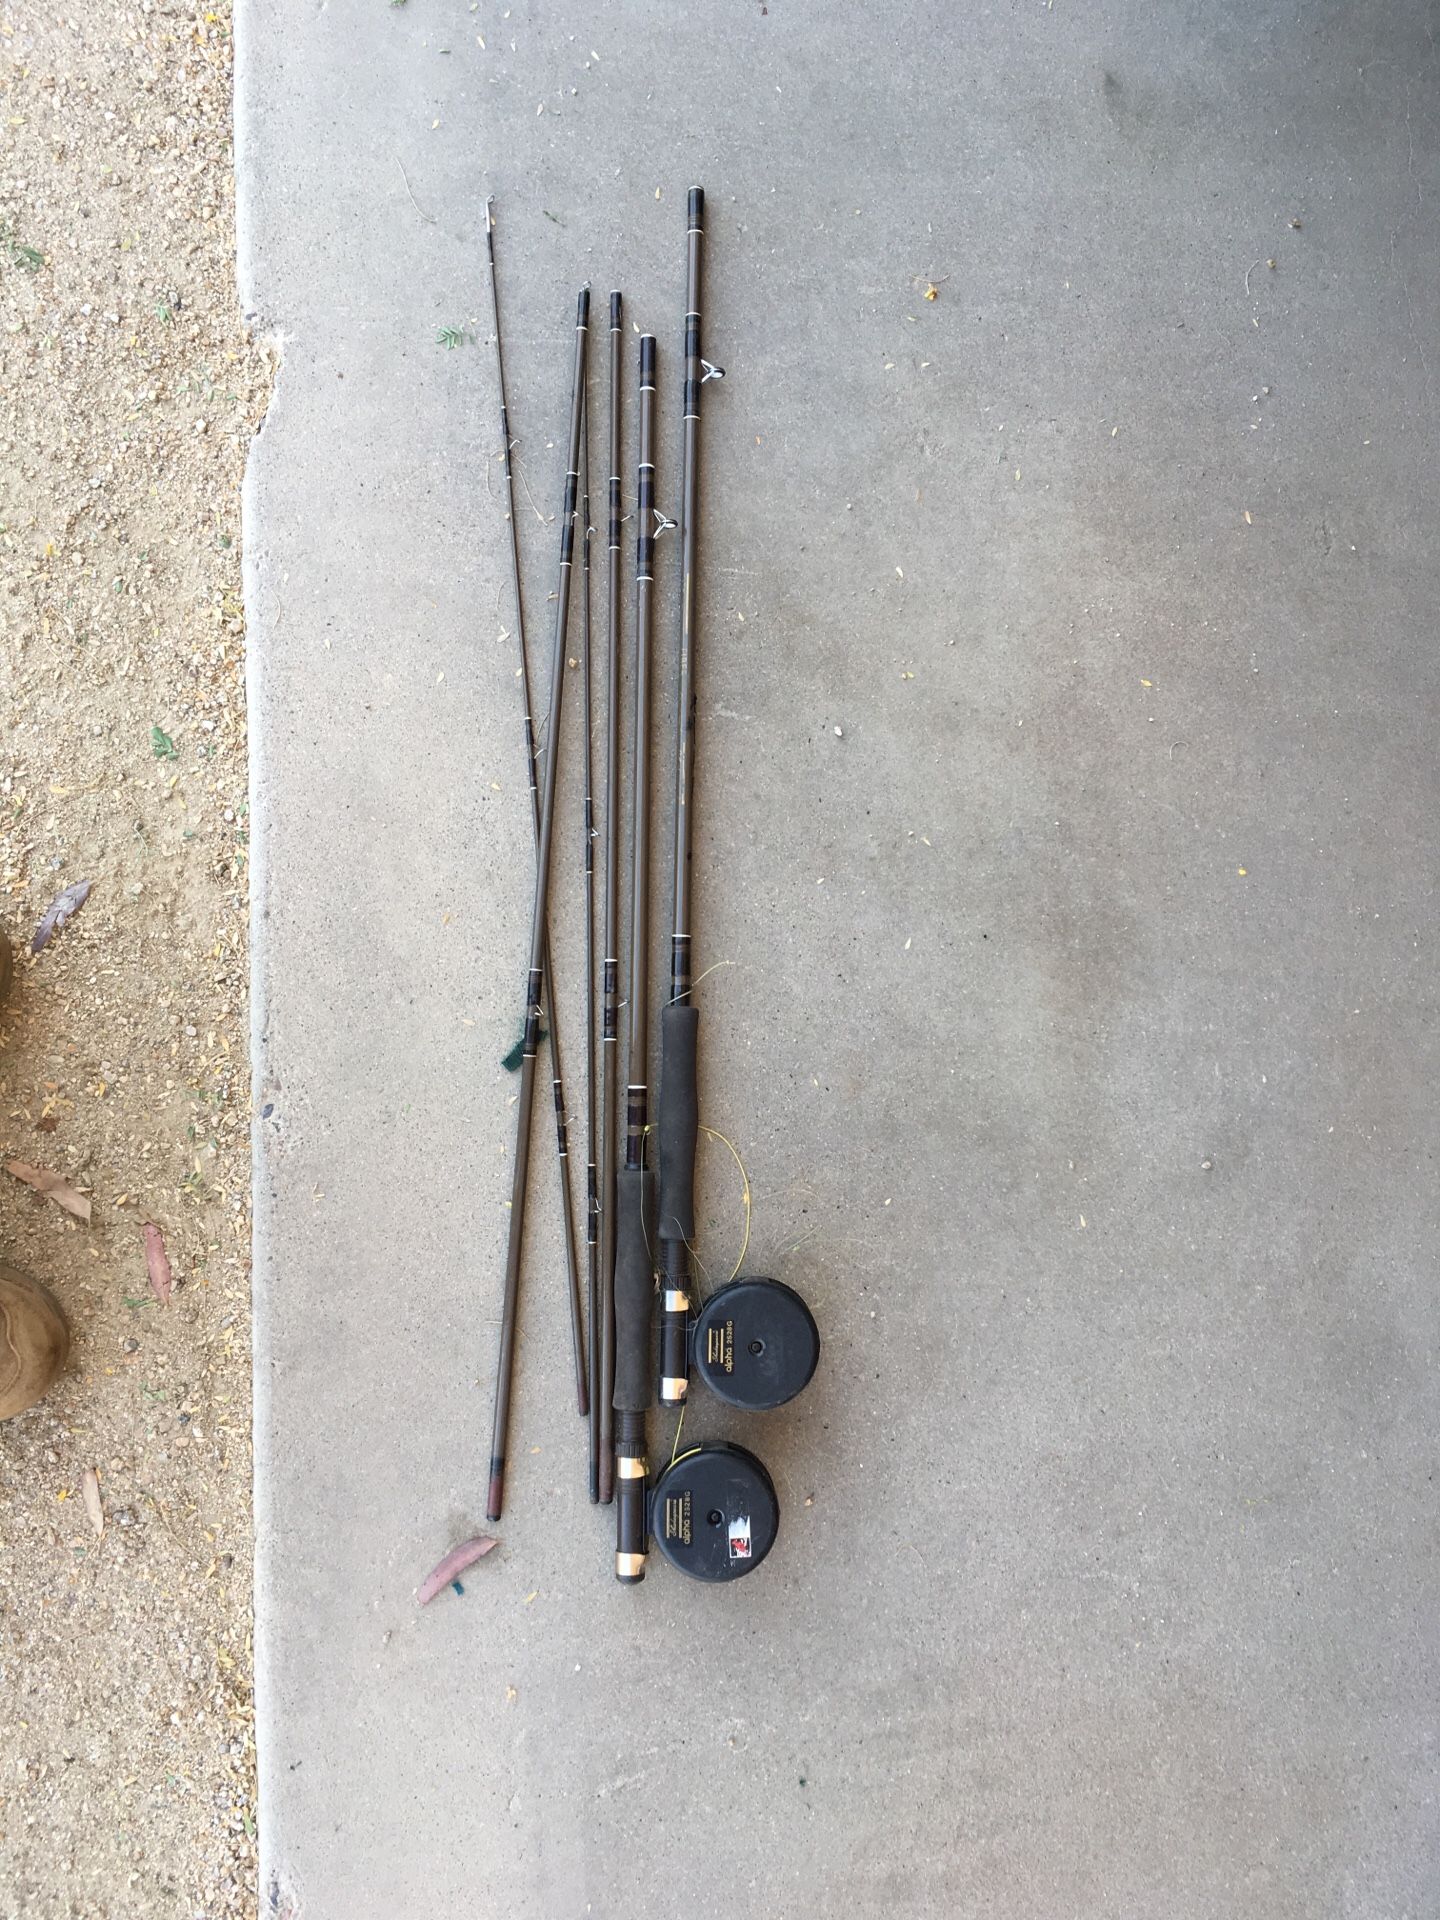 Fishing poles with fly reels